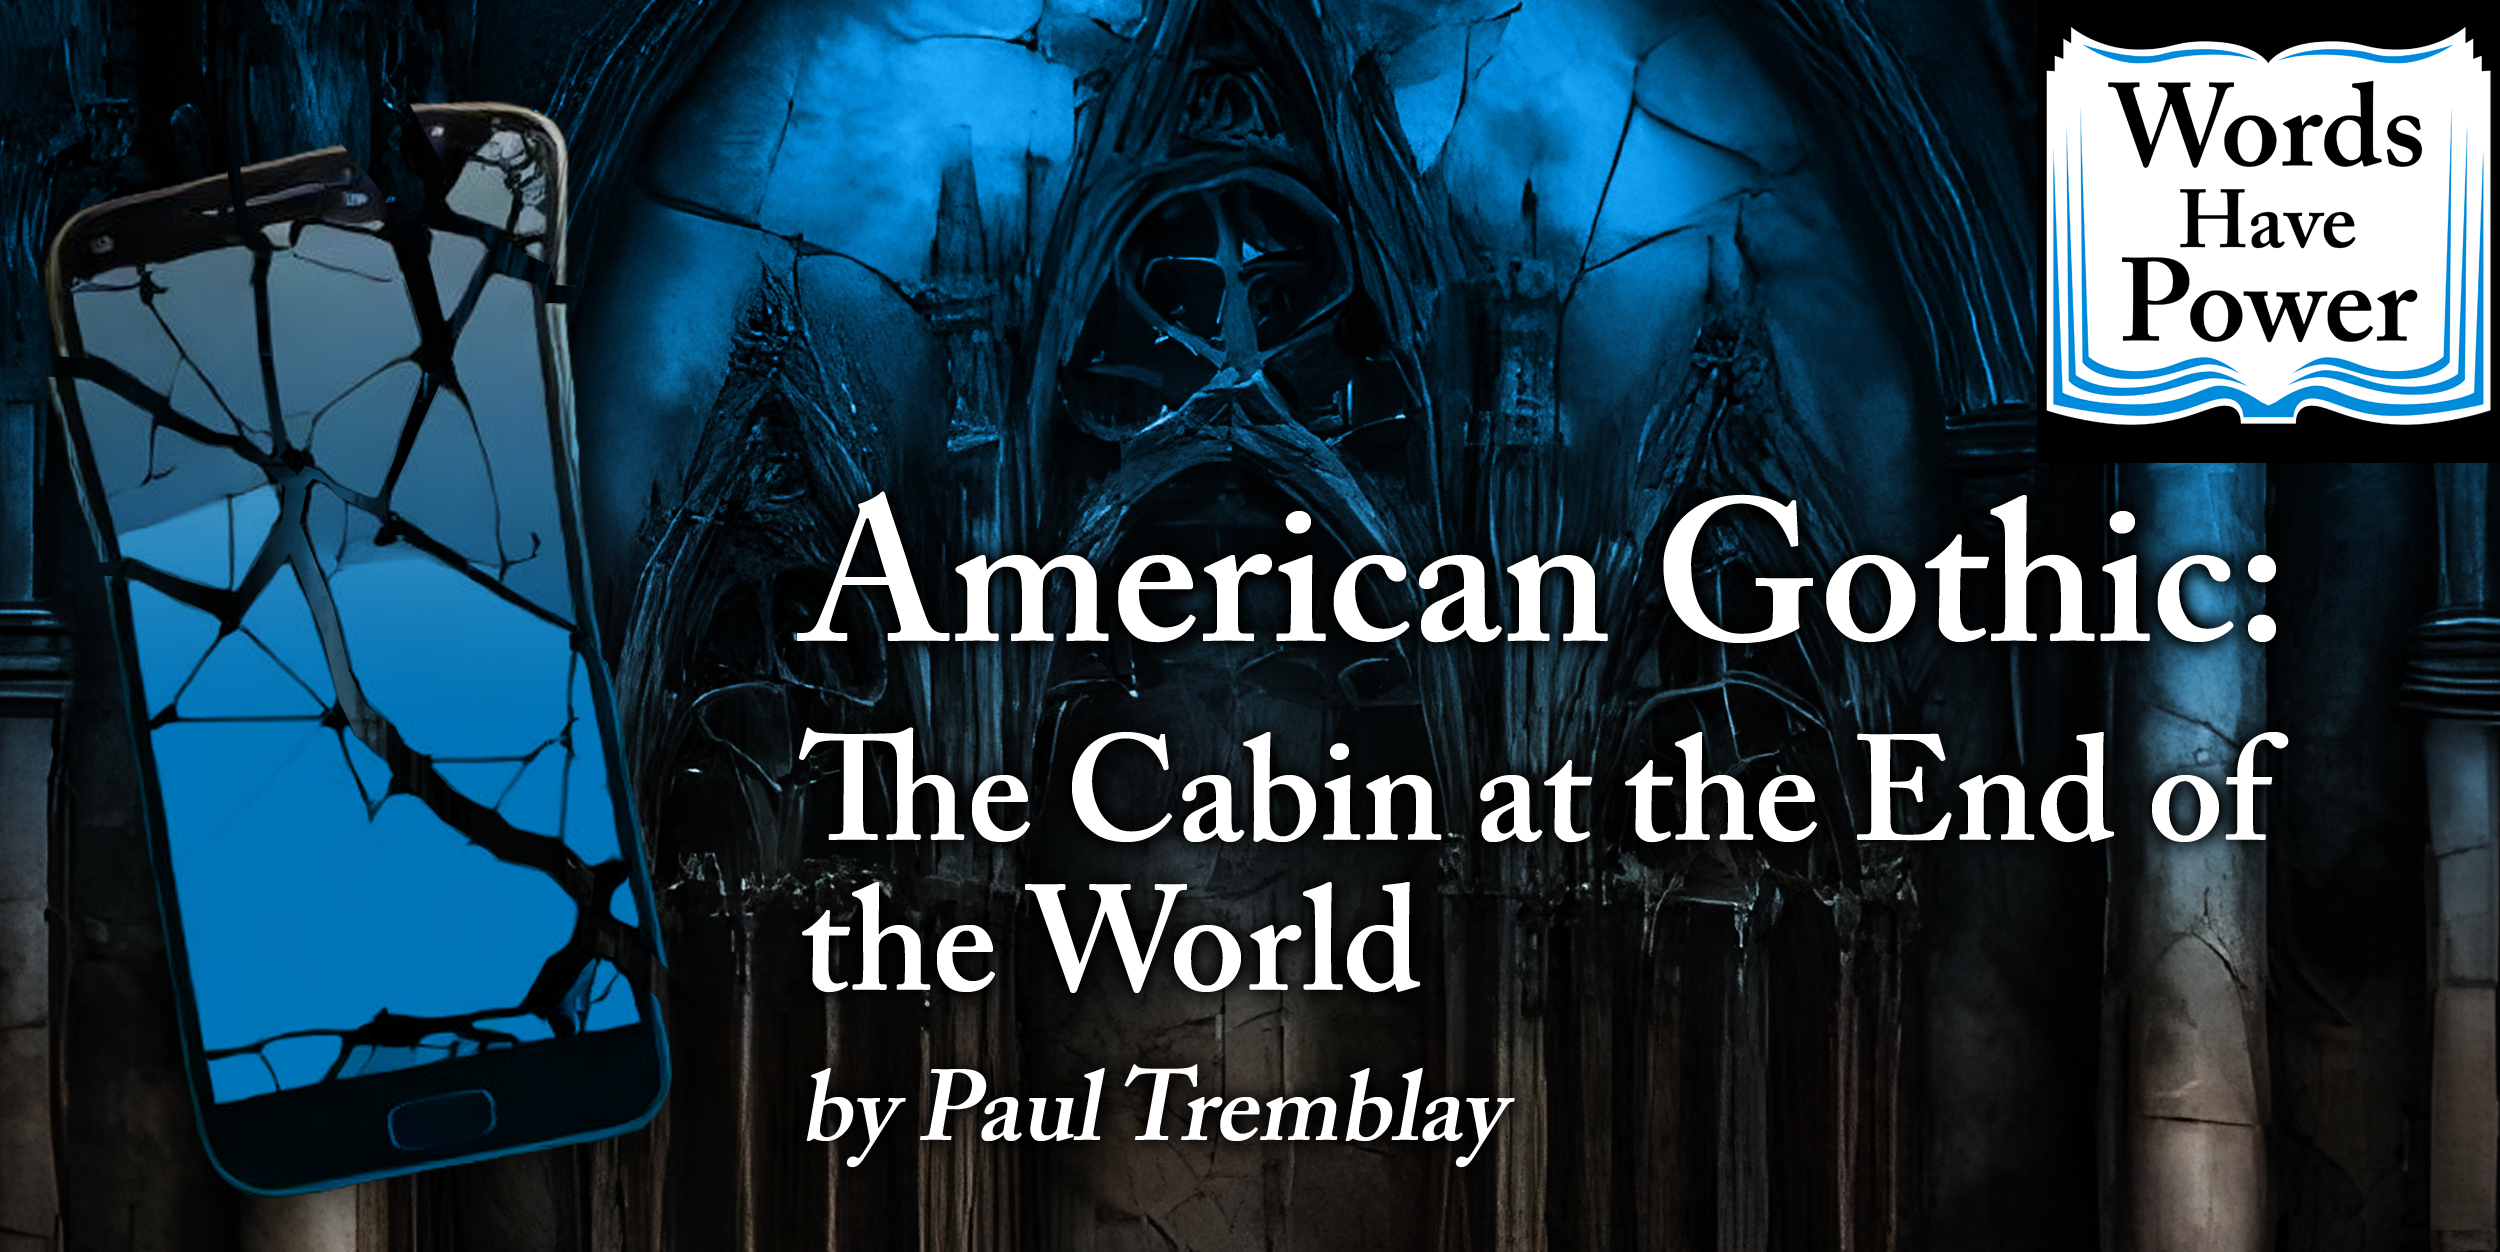 American Gothic: The Cabin at the End of the World by Paul Tremblay